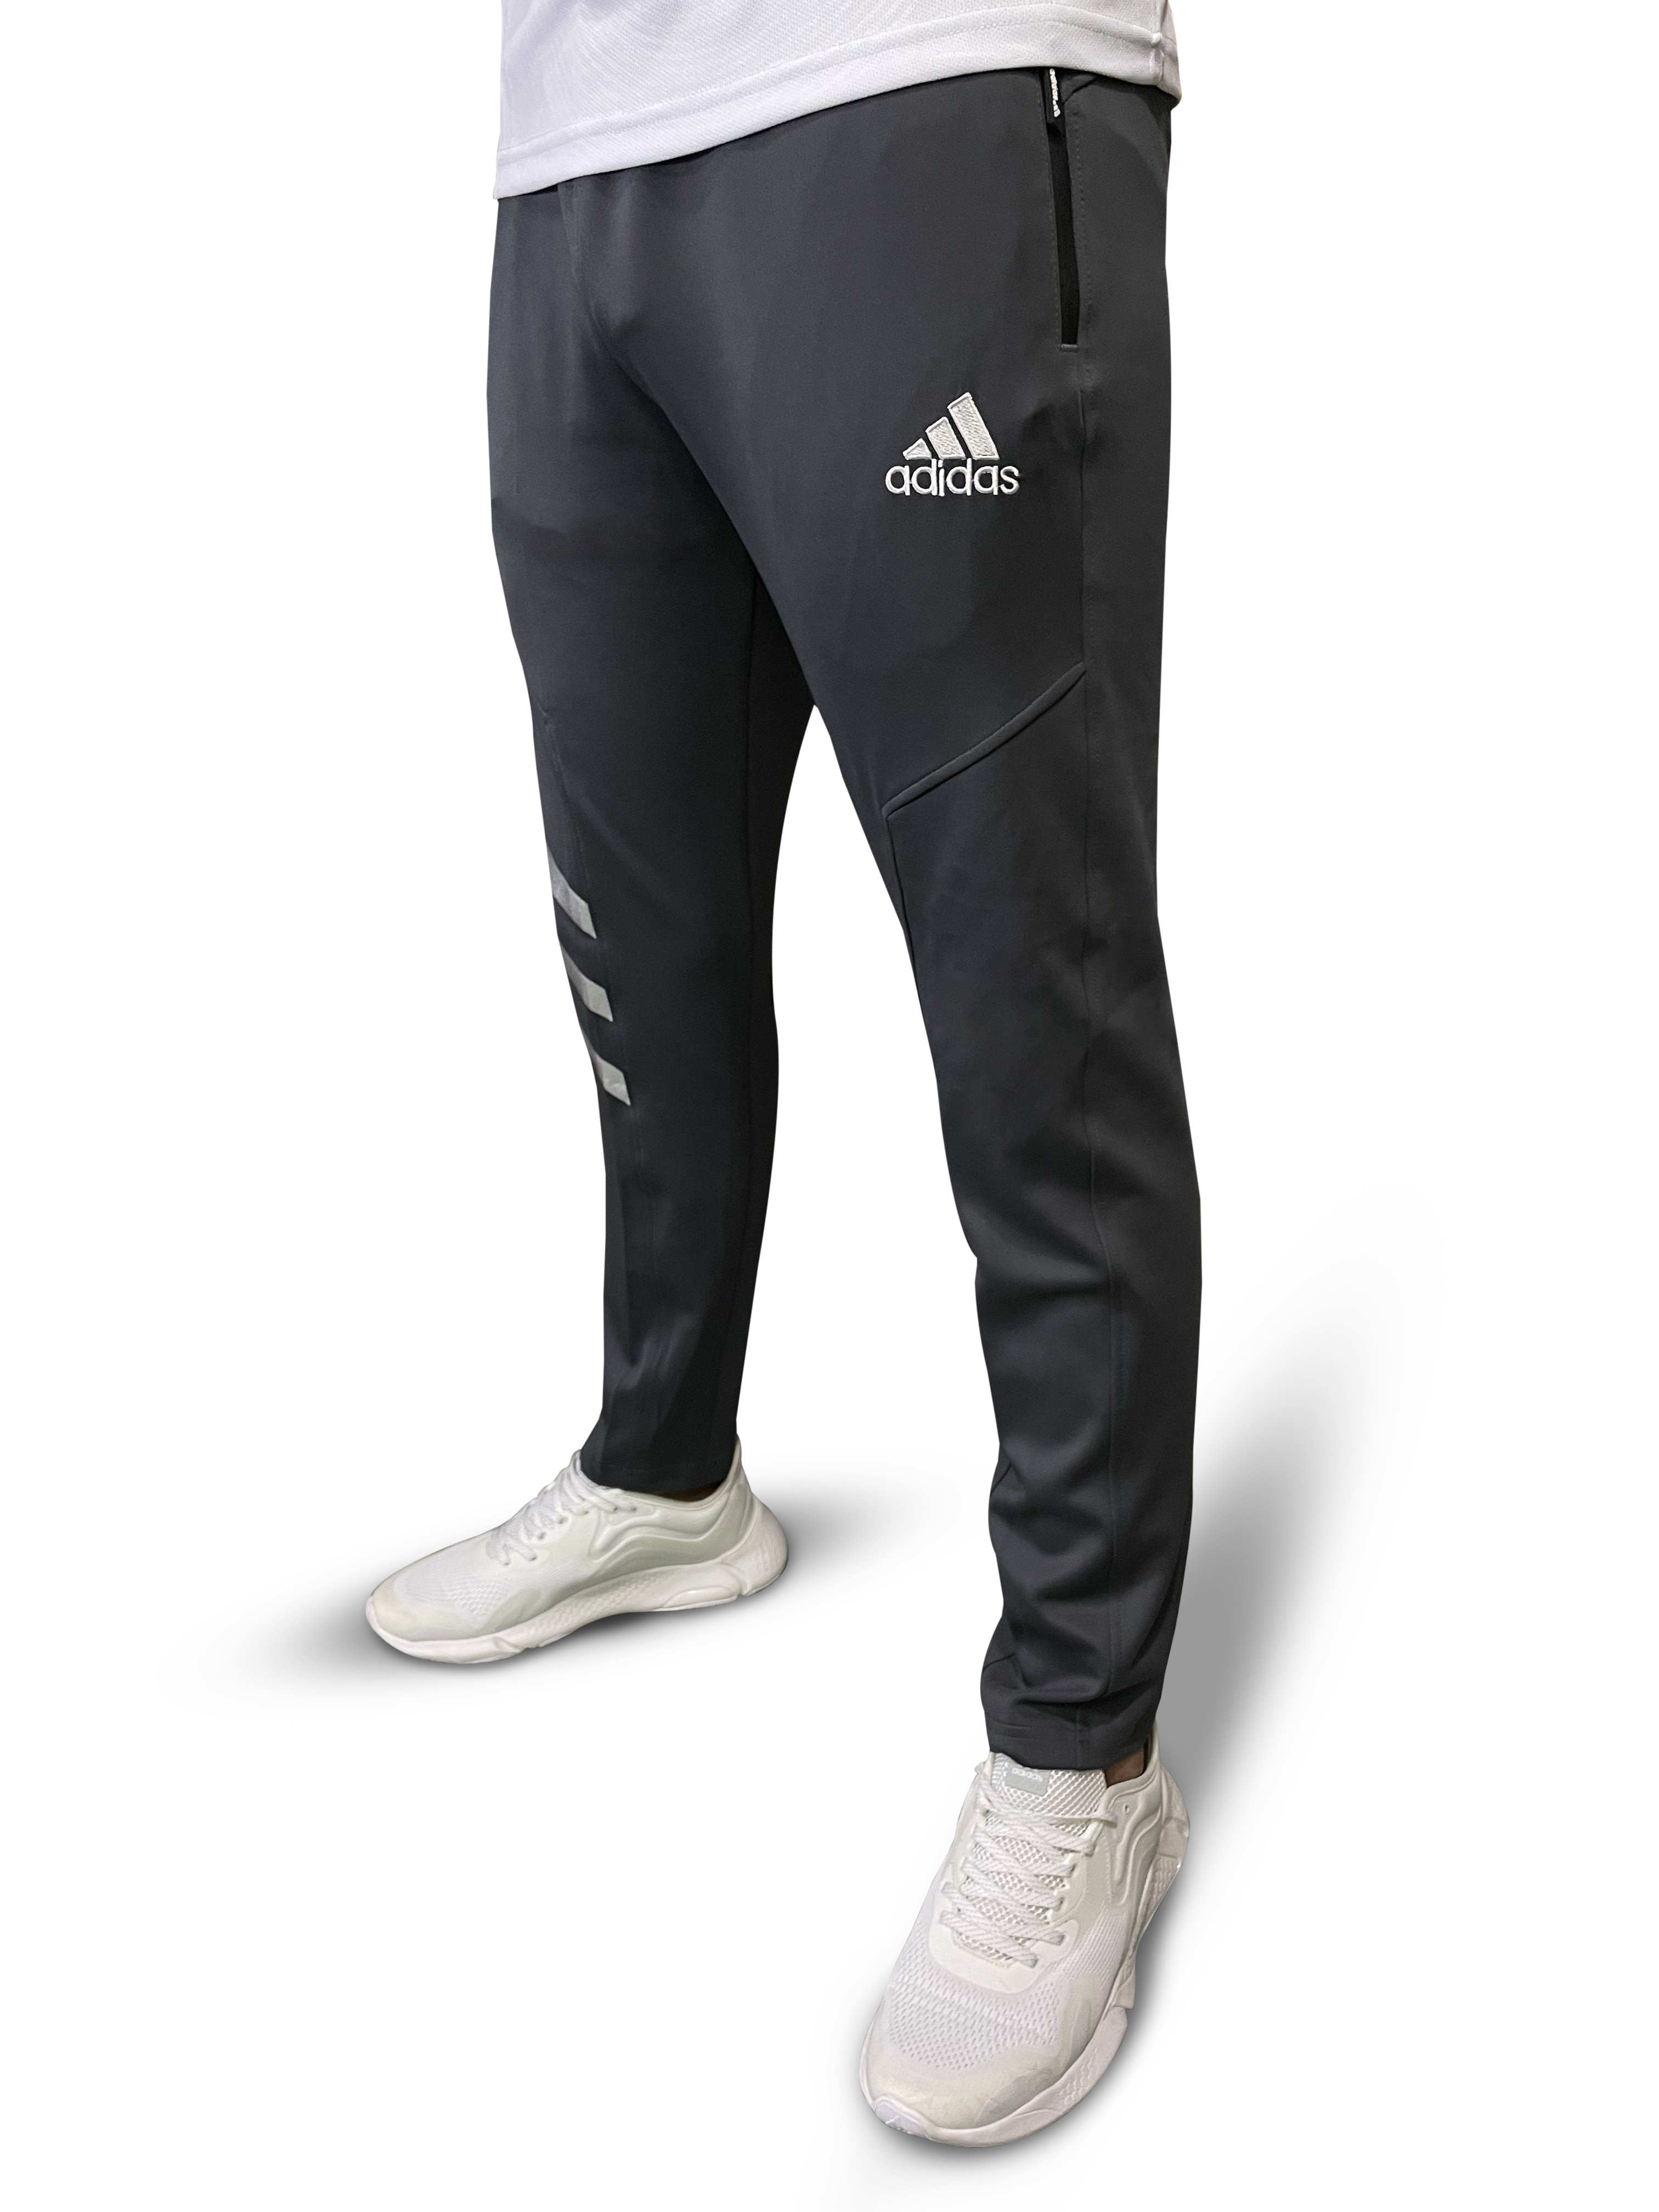 <p><strong>ADIDAS SPORTS</strong> </p><p><span style="color: #a8a8a8">PANTS</span></p>